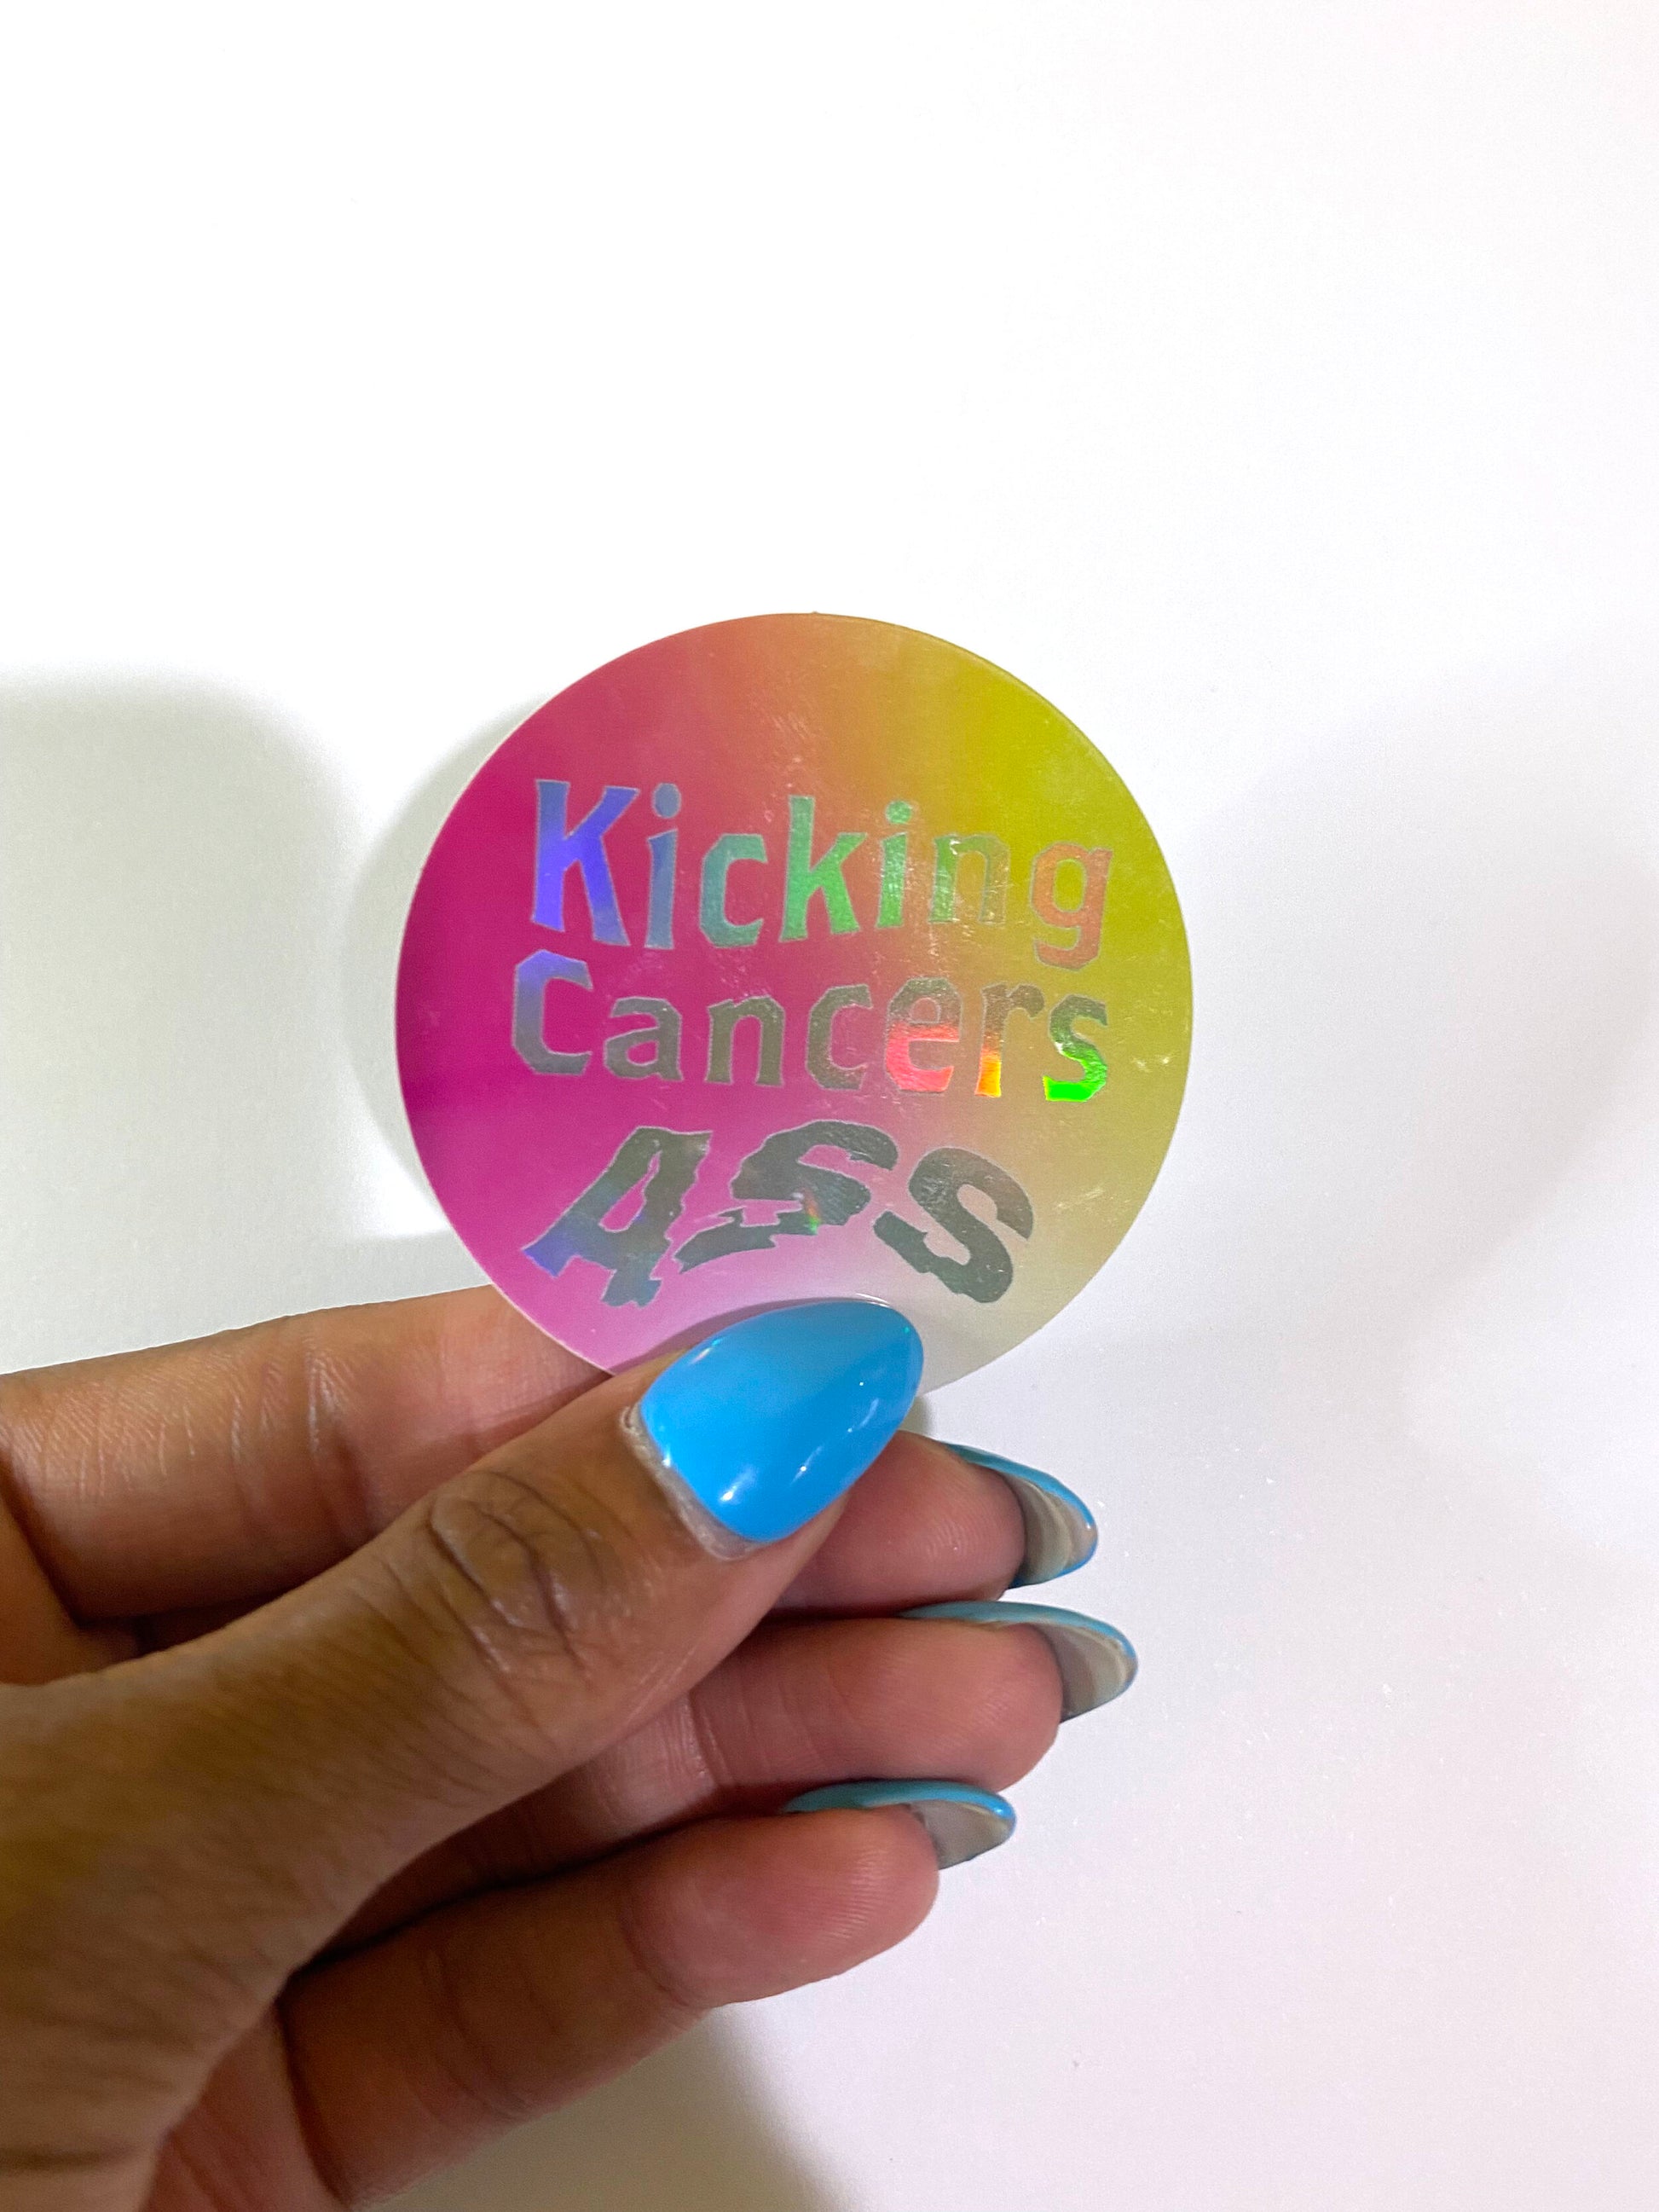 Kicking Cancers Ass holographic high quality vinyl waterproof and scratch resistant sticker from Goods Made By Digitrillnana. Perfect for laptops, water bottles, phone cases, luggage, journals, and more! Black Woman Owned.